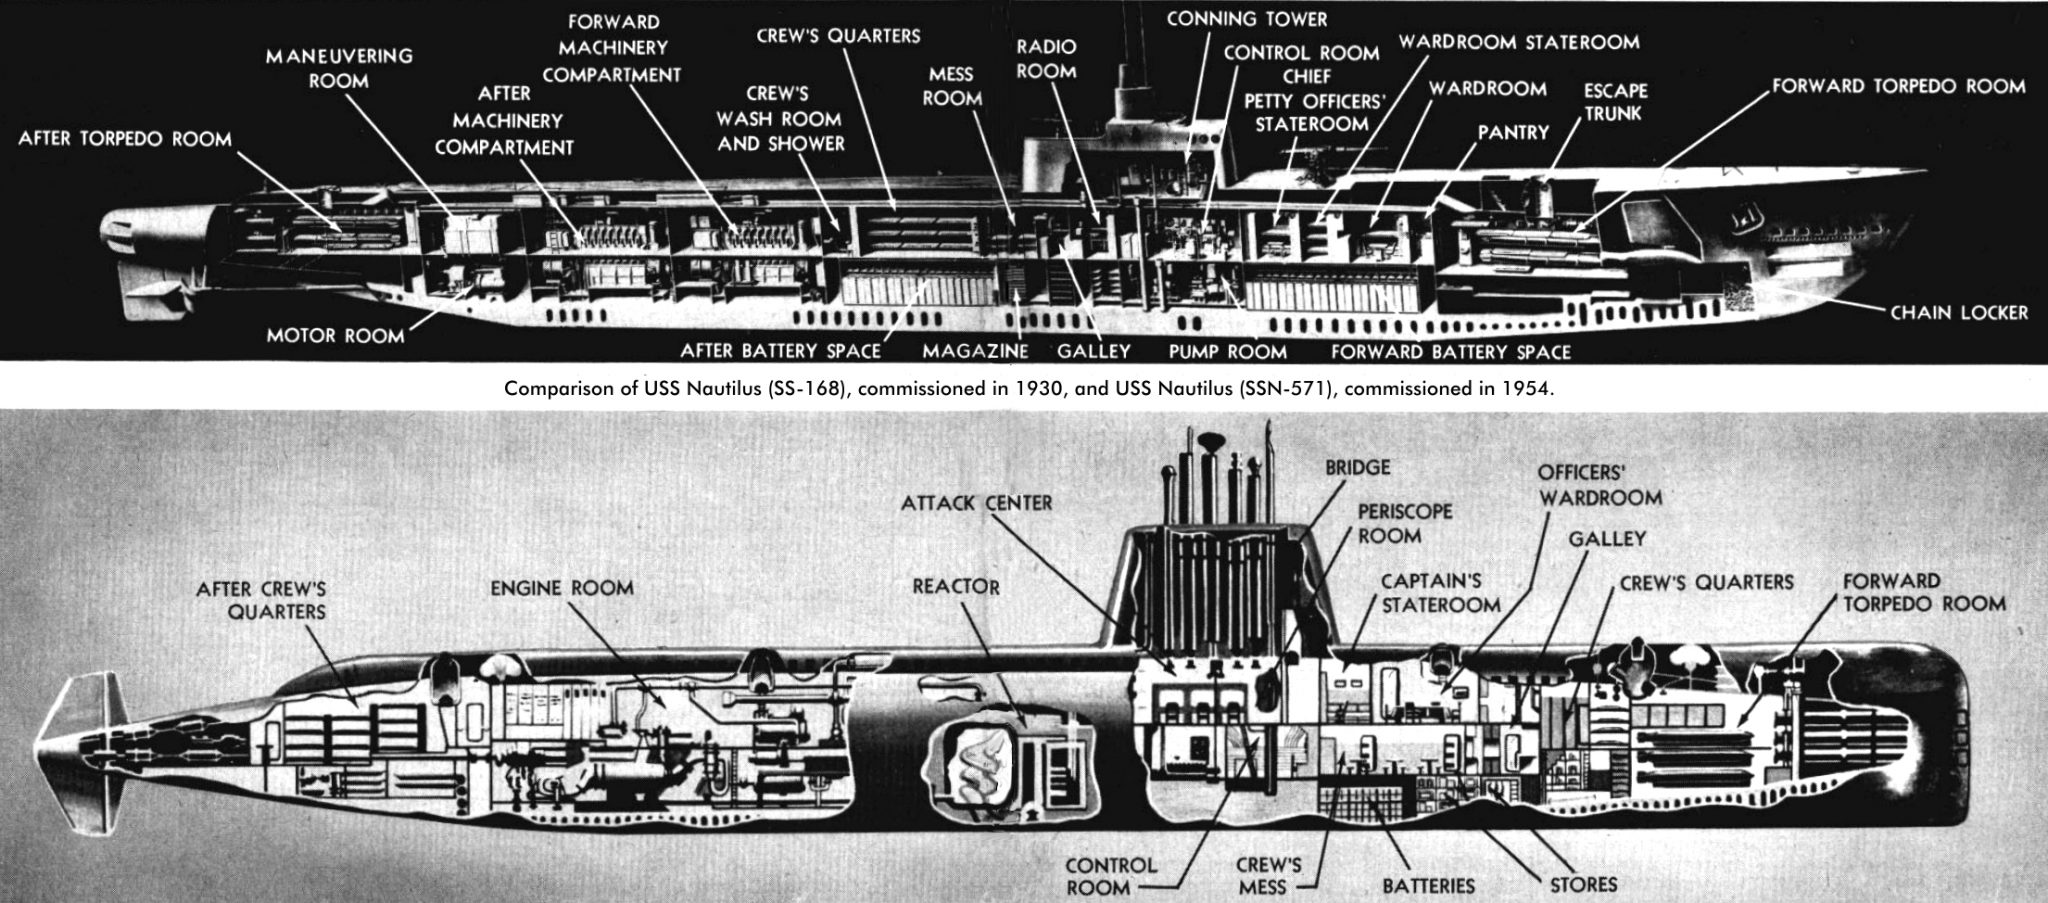 USS Nautilus - the world's first nuclear submarine - commissioned 1